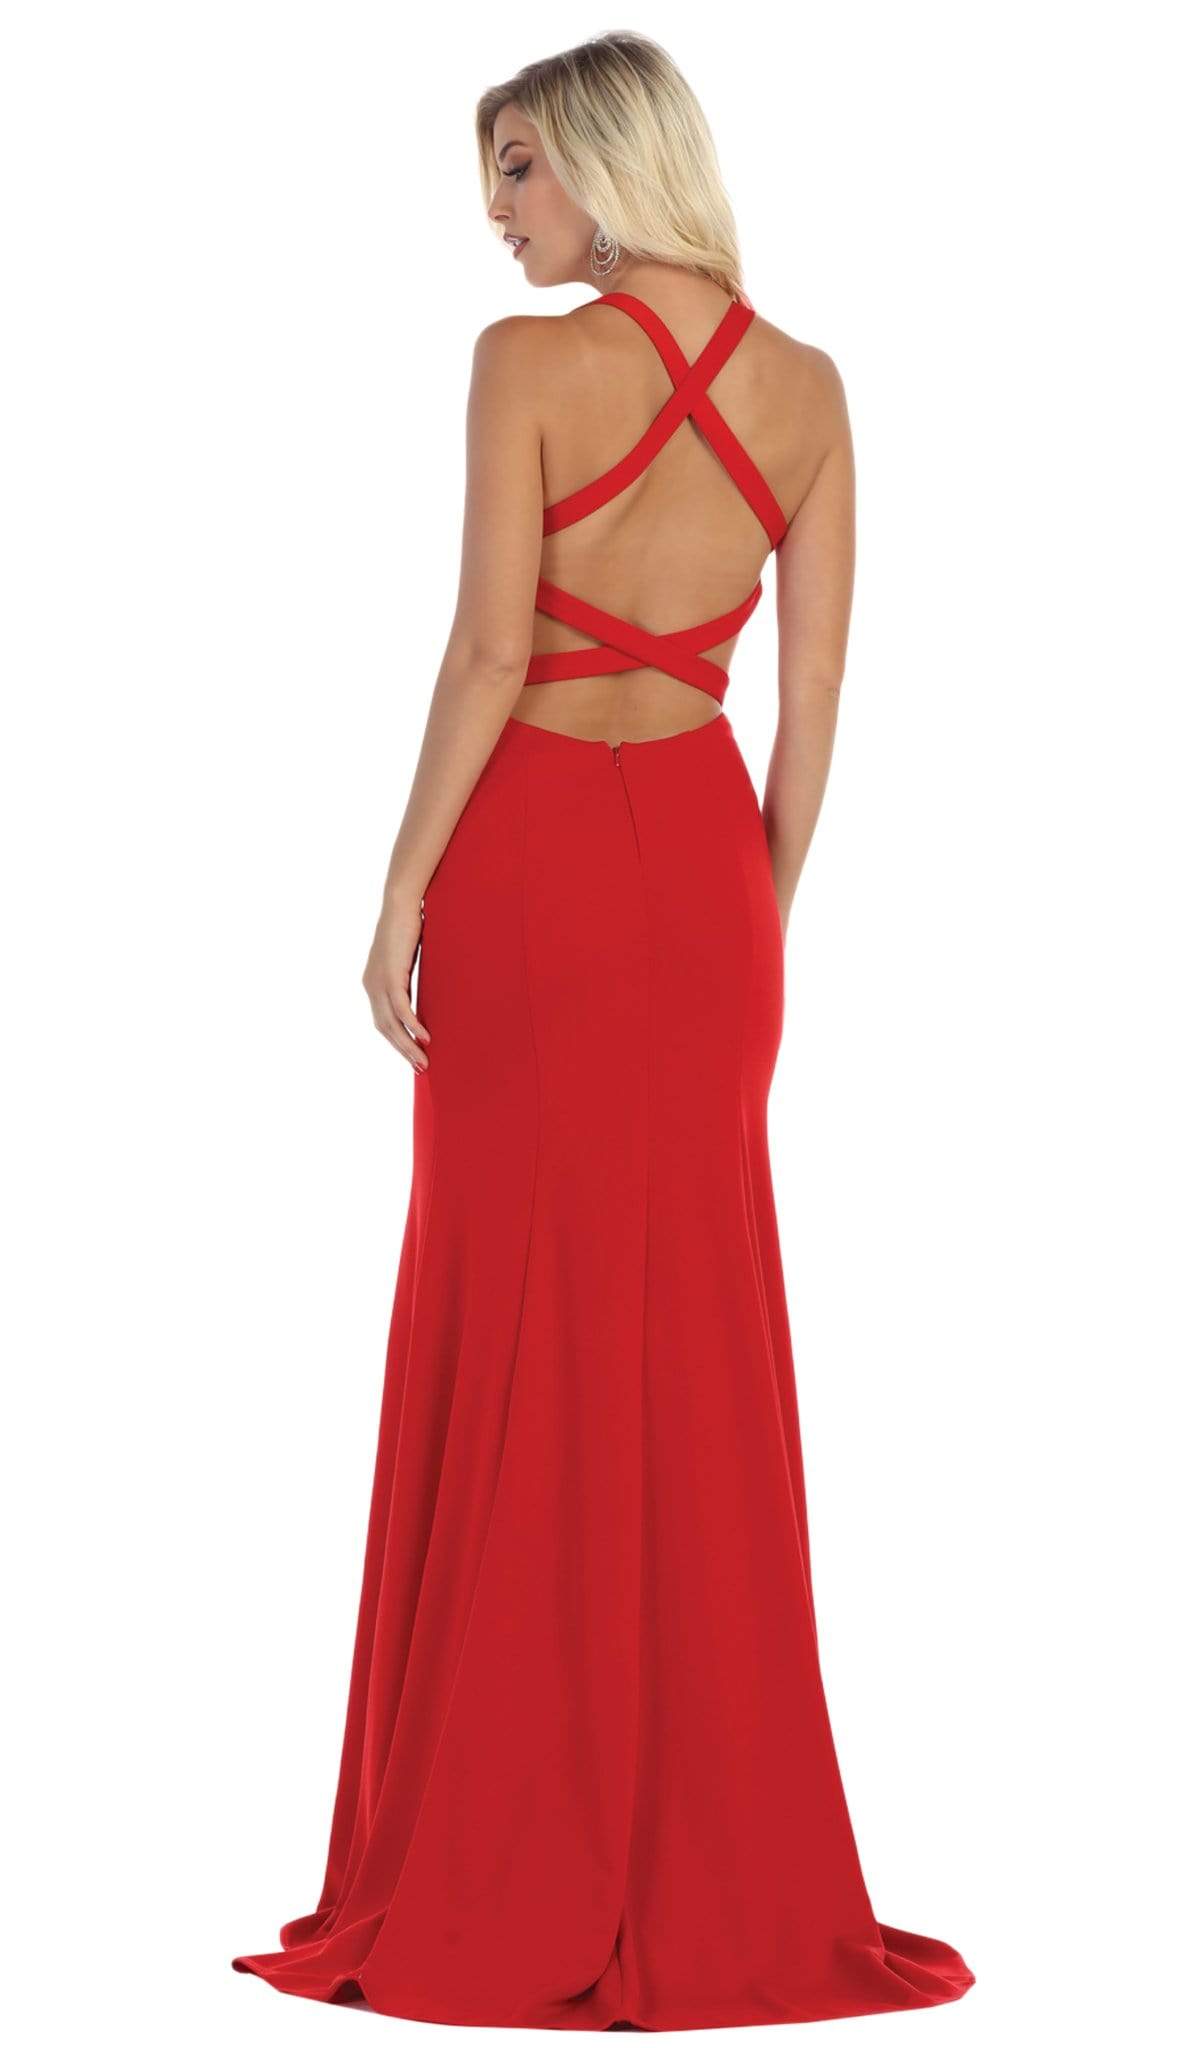 May Queen - MQ1636 Halter Crisscross Straps Open Back Mermaid Gown Special Occasion Dress